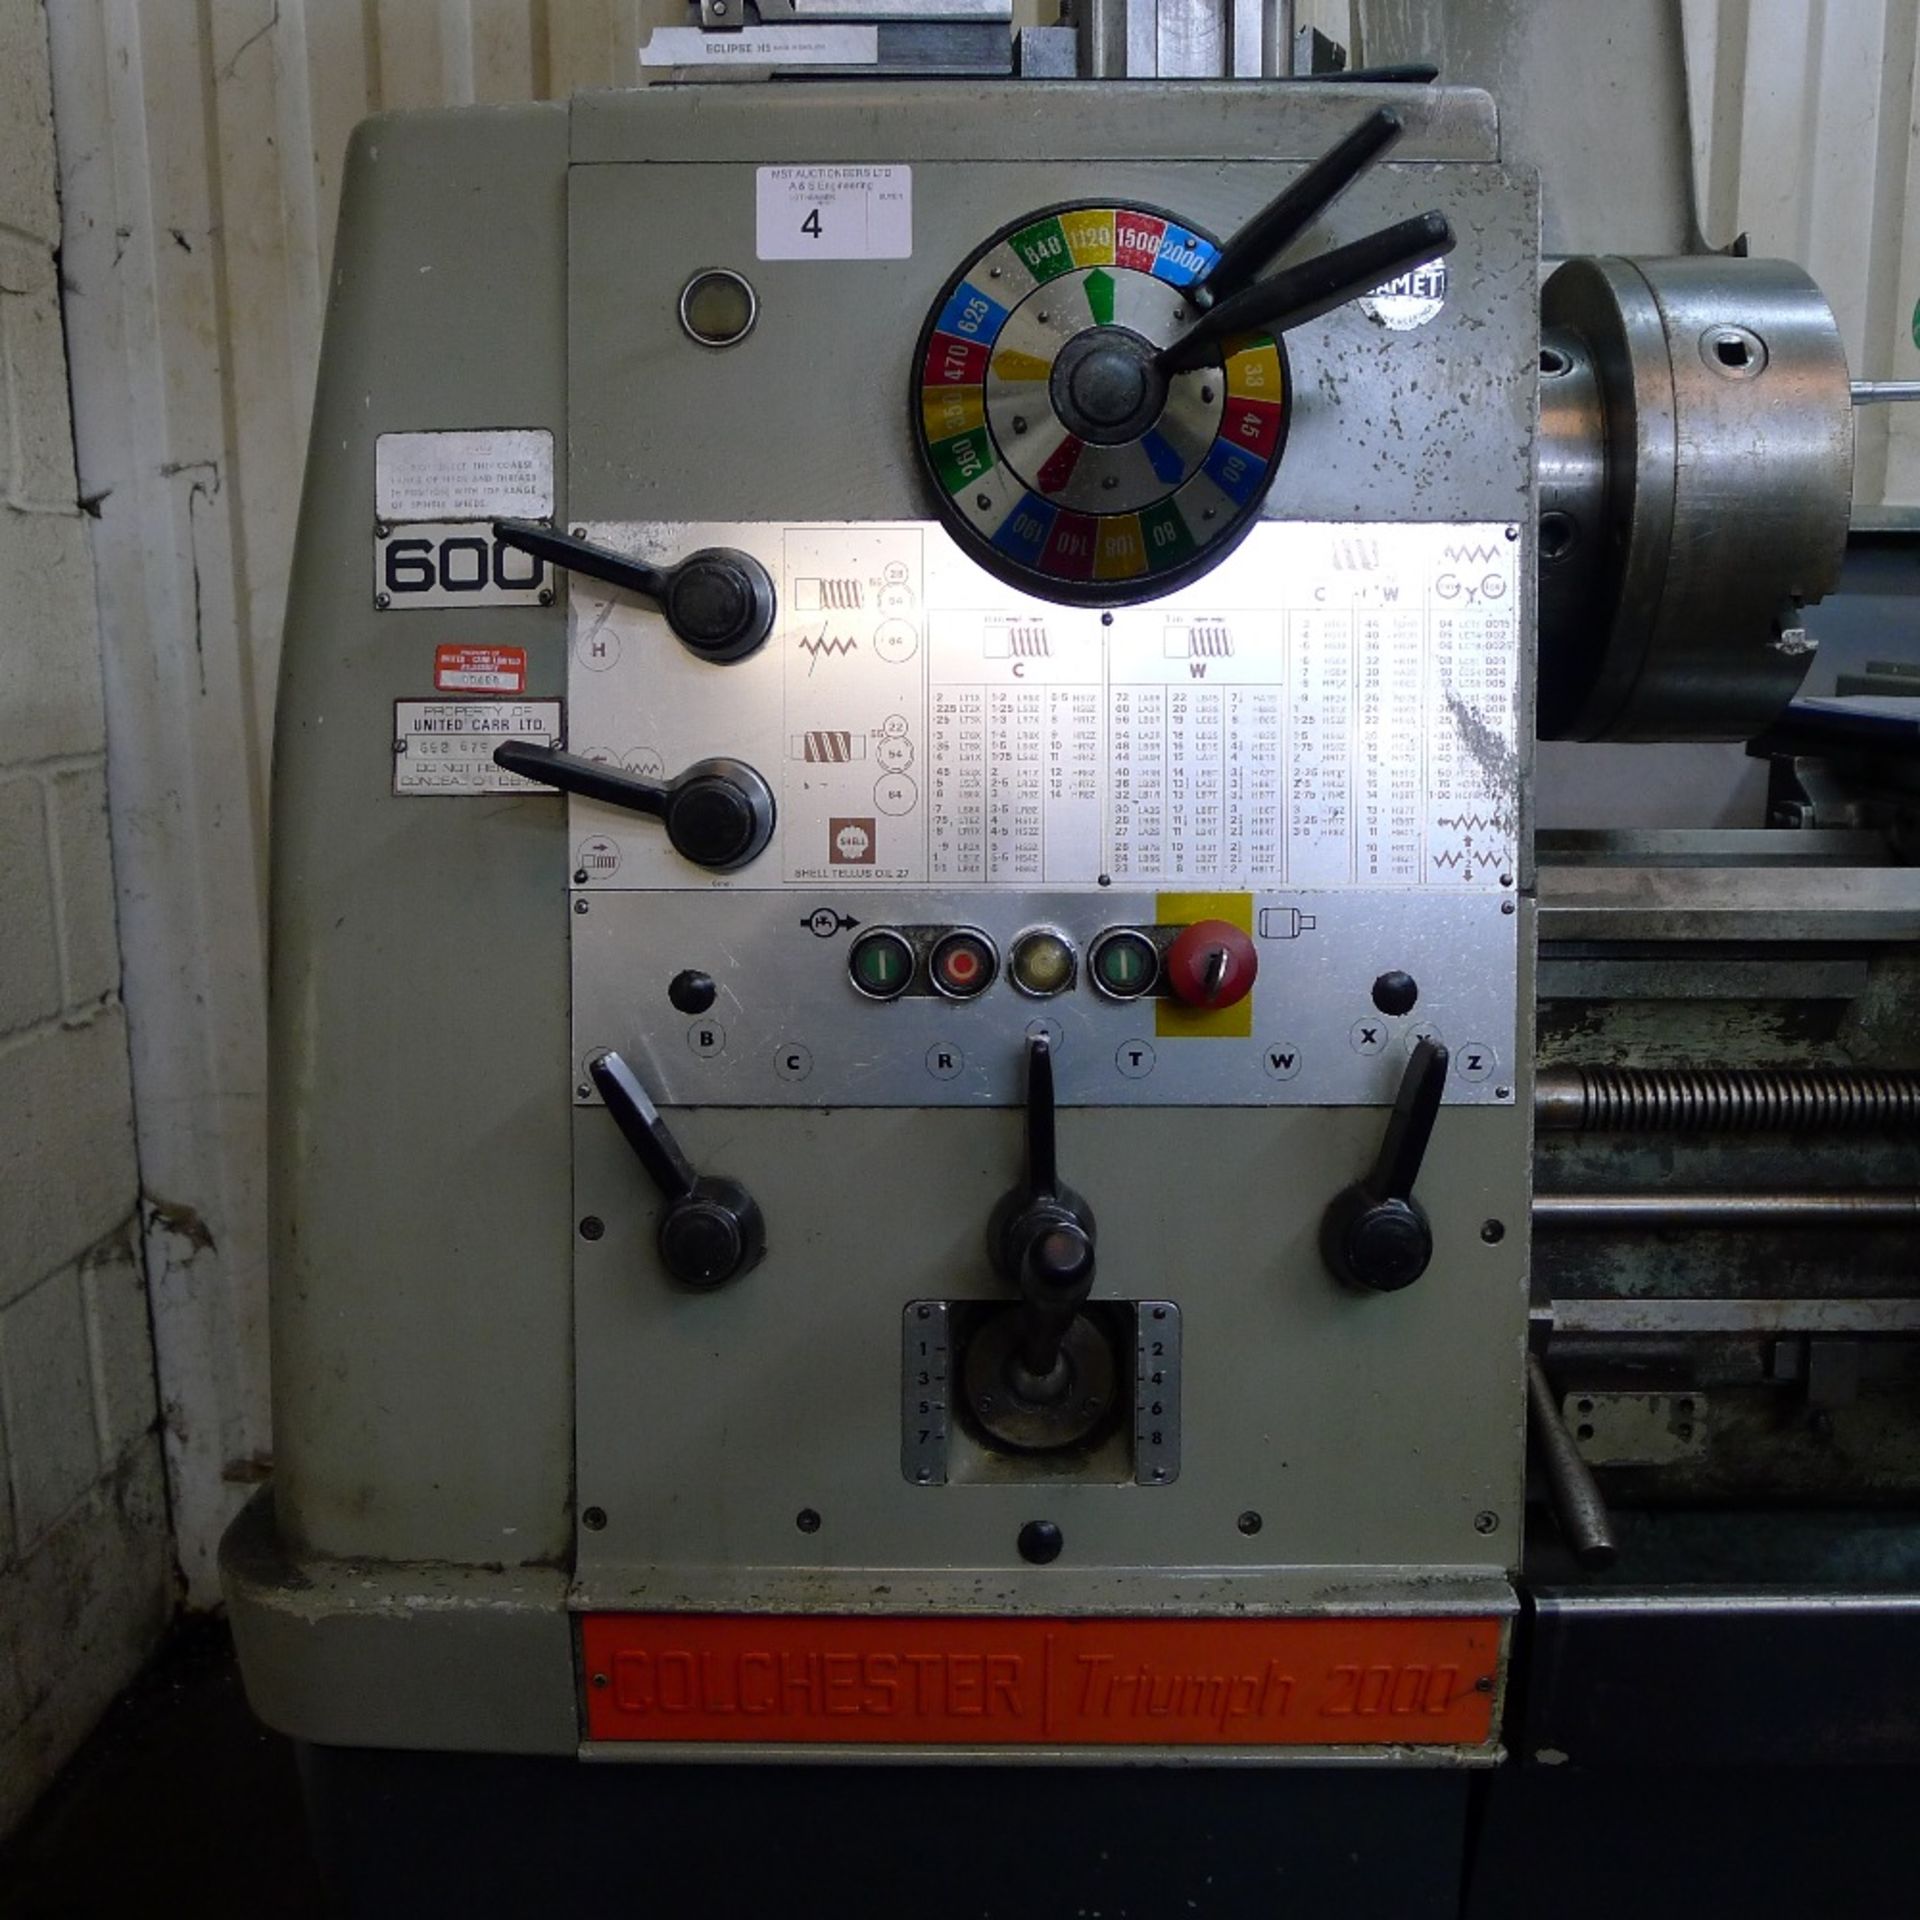 1 Colchester centre lathe type Triumph 2000 serial no. 6/0048/28923, 3ph, overall bed length 1.3m, - Image 5 of 11